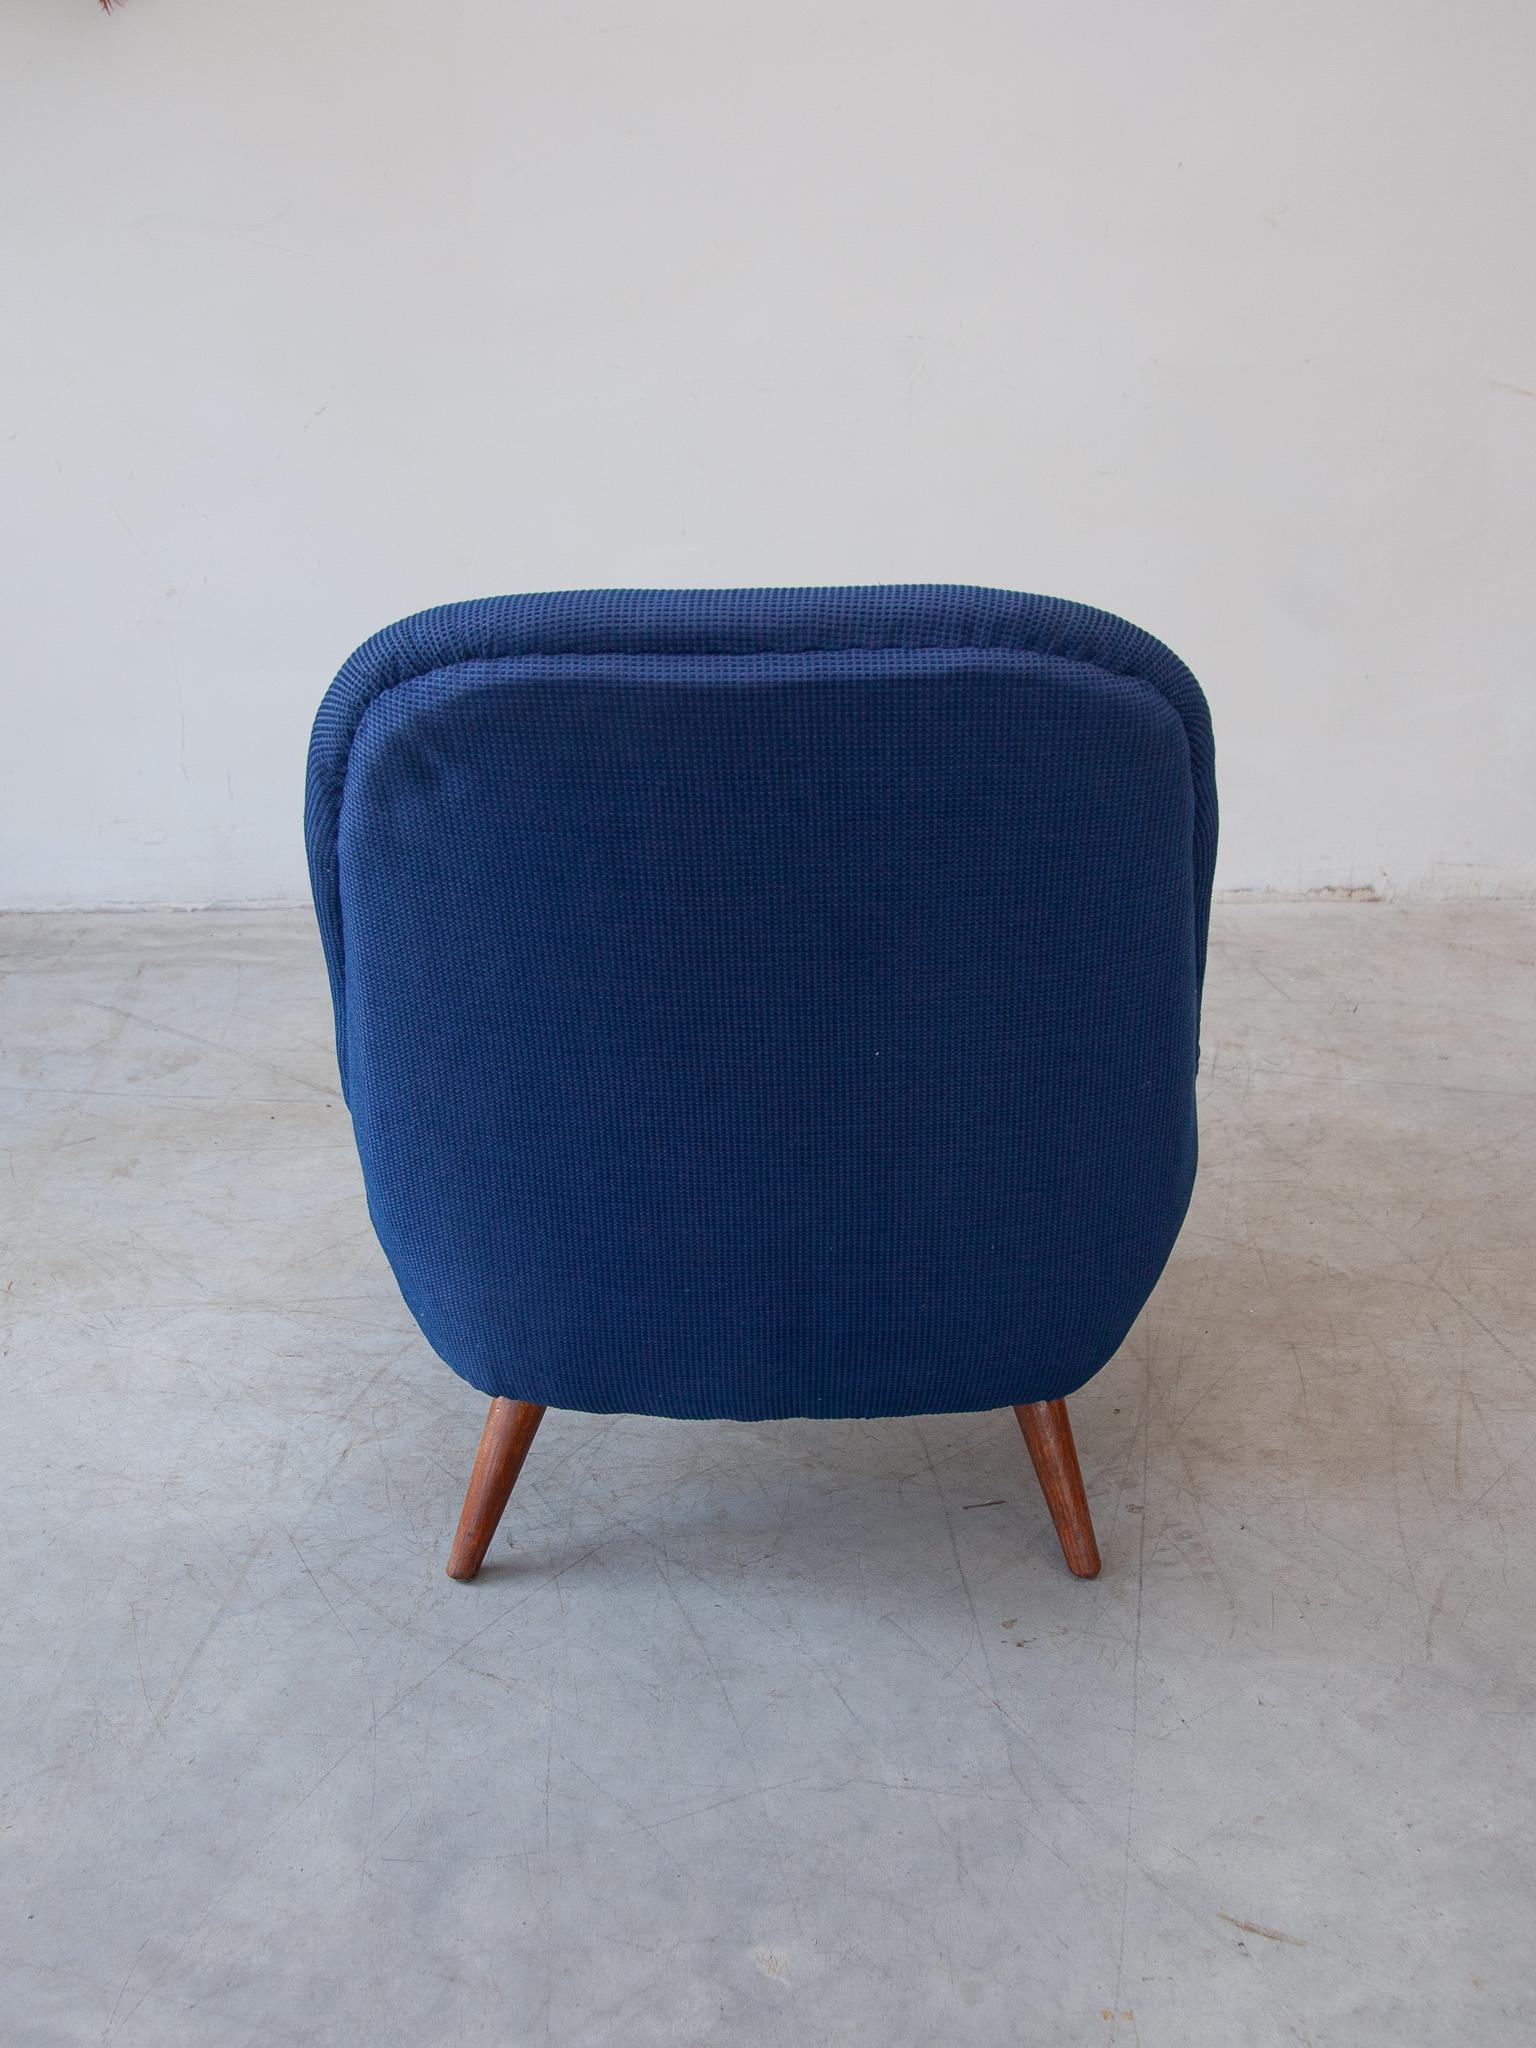 Midcentury Modern 1950s Blue Fabric, Lounge Arm Chair, Scandinavian Design In Good Condition For Sale In Antwerp, BE